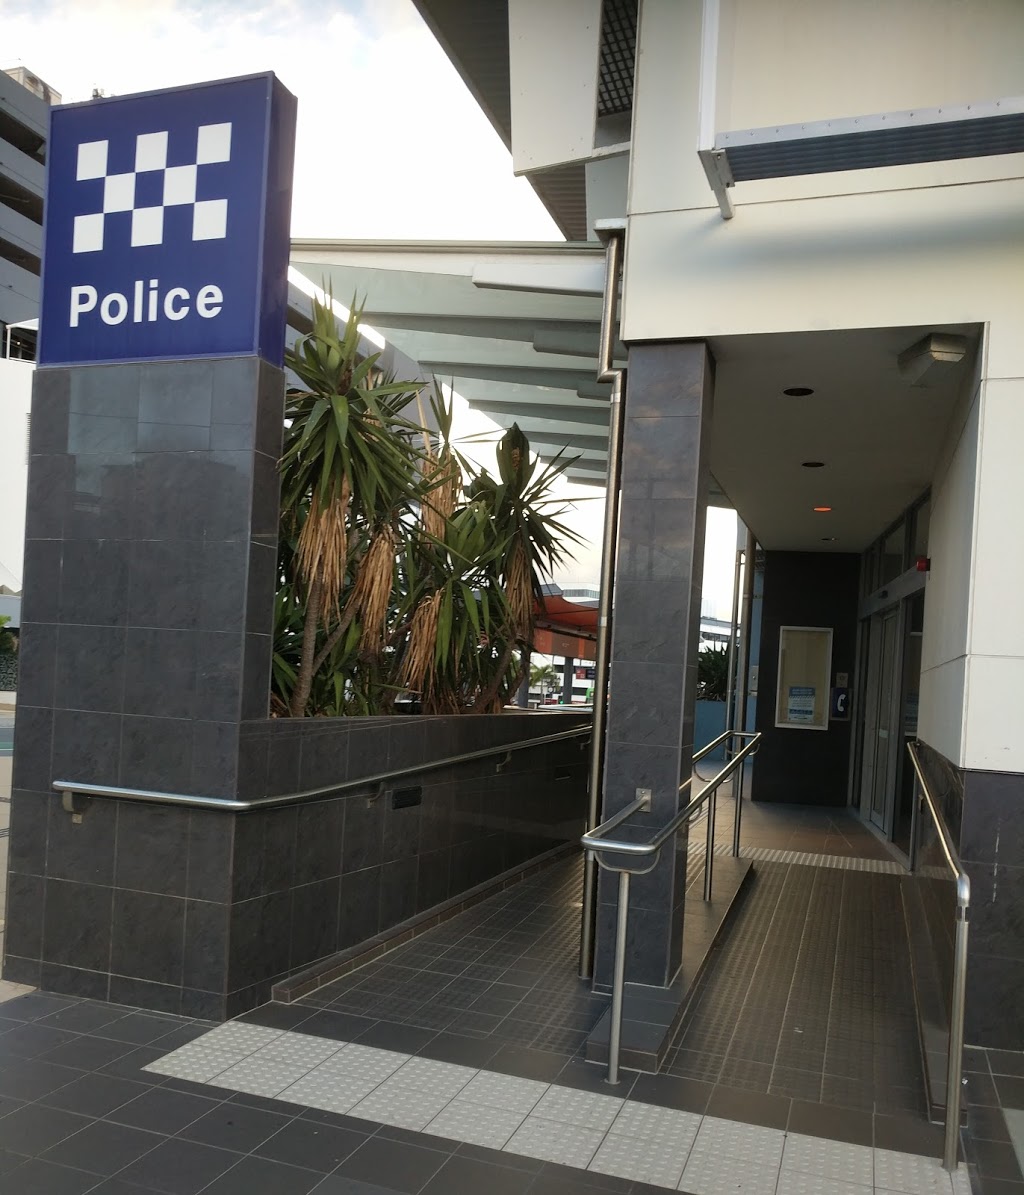 Southport Police Station | police | 96 Scarborough St, Southport QLD 4215, Australia | 131444 OR +61 131444